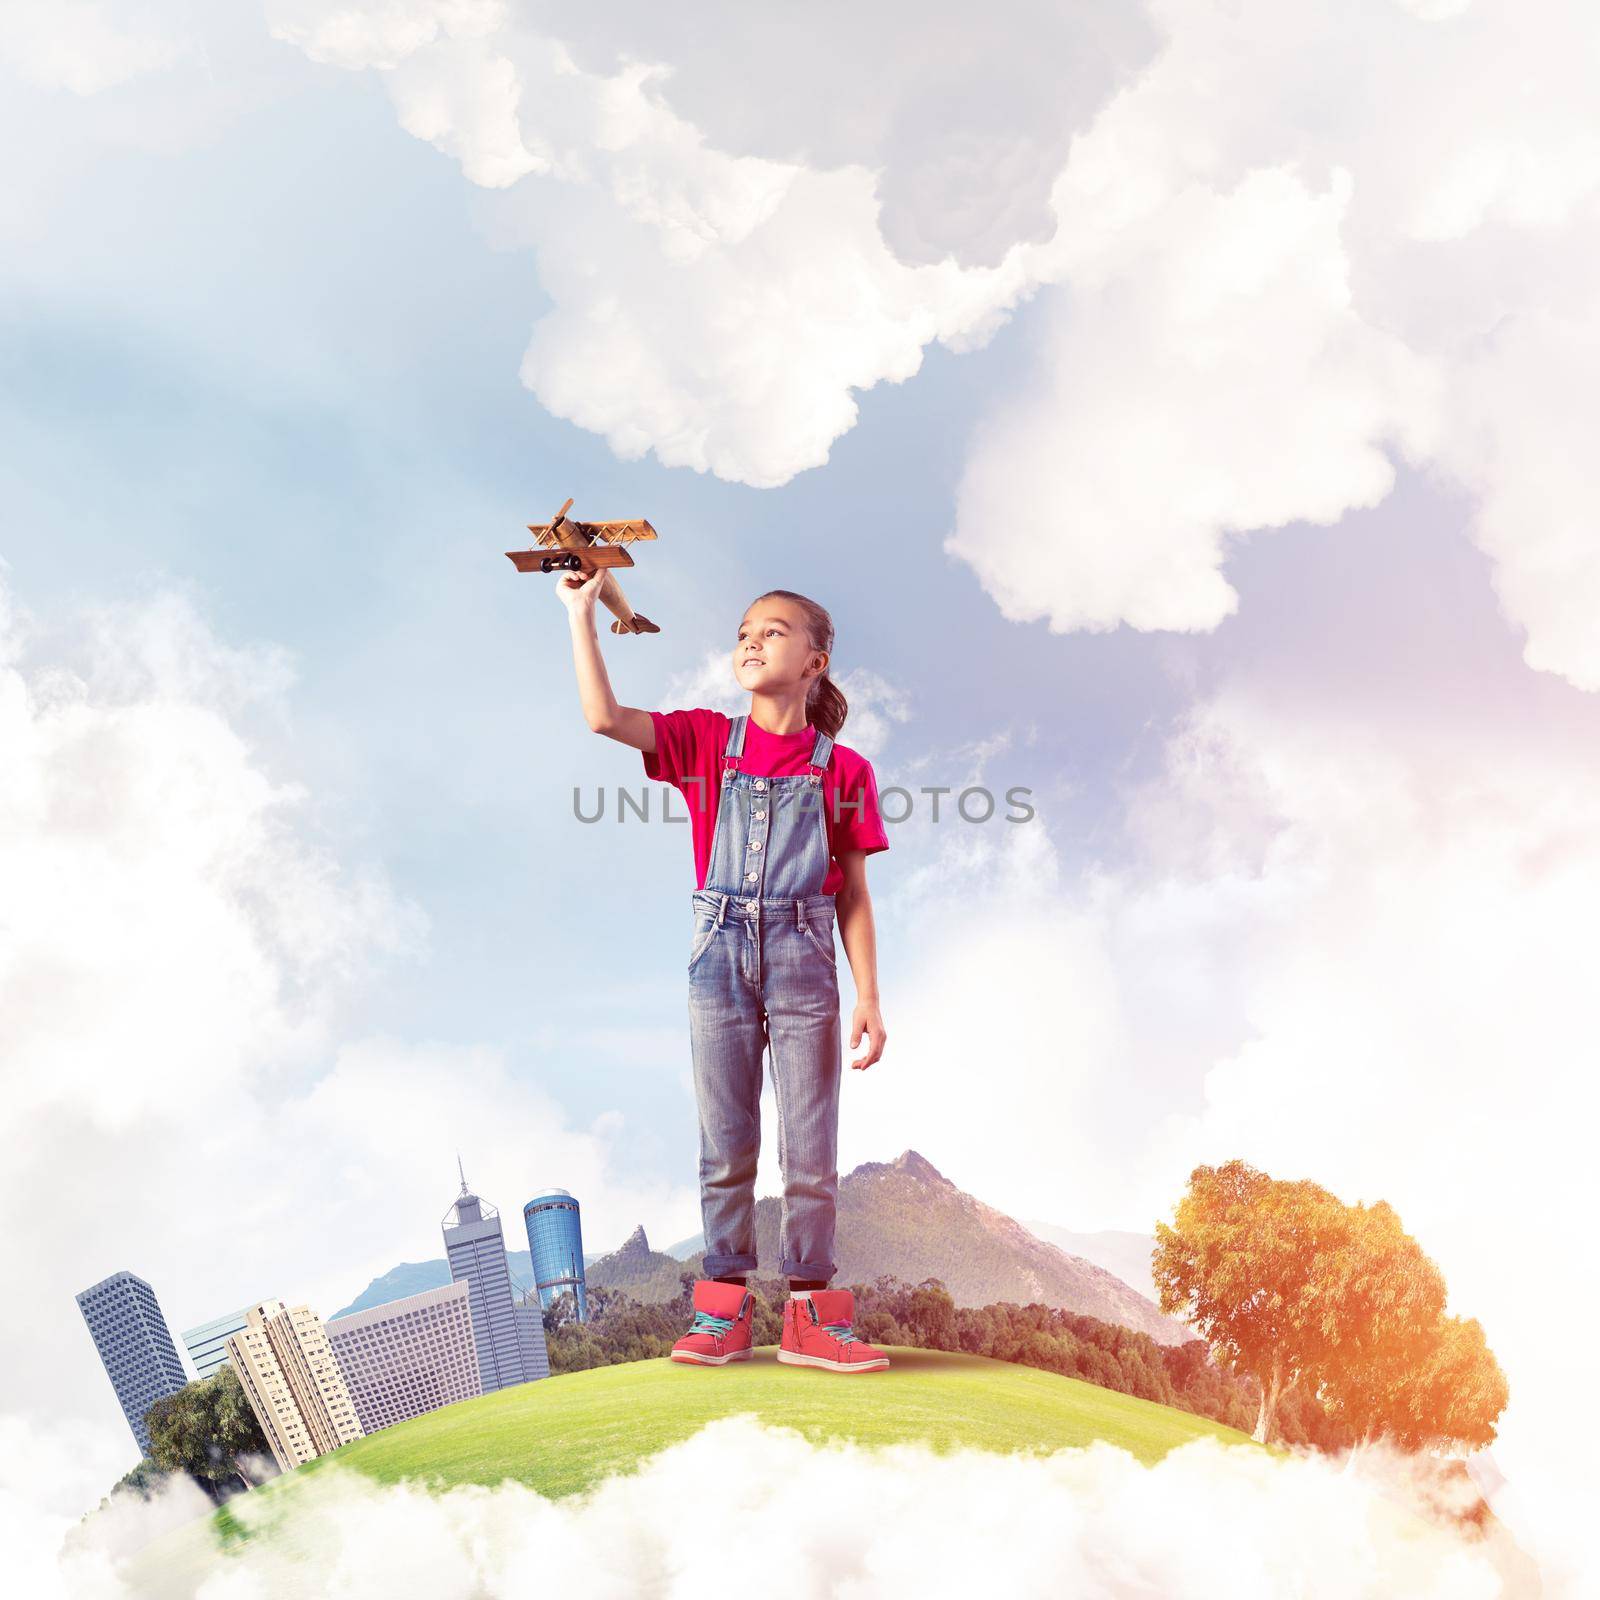 Concept of careless happy childhood with girl dreaming to become pilot by adam121